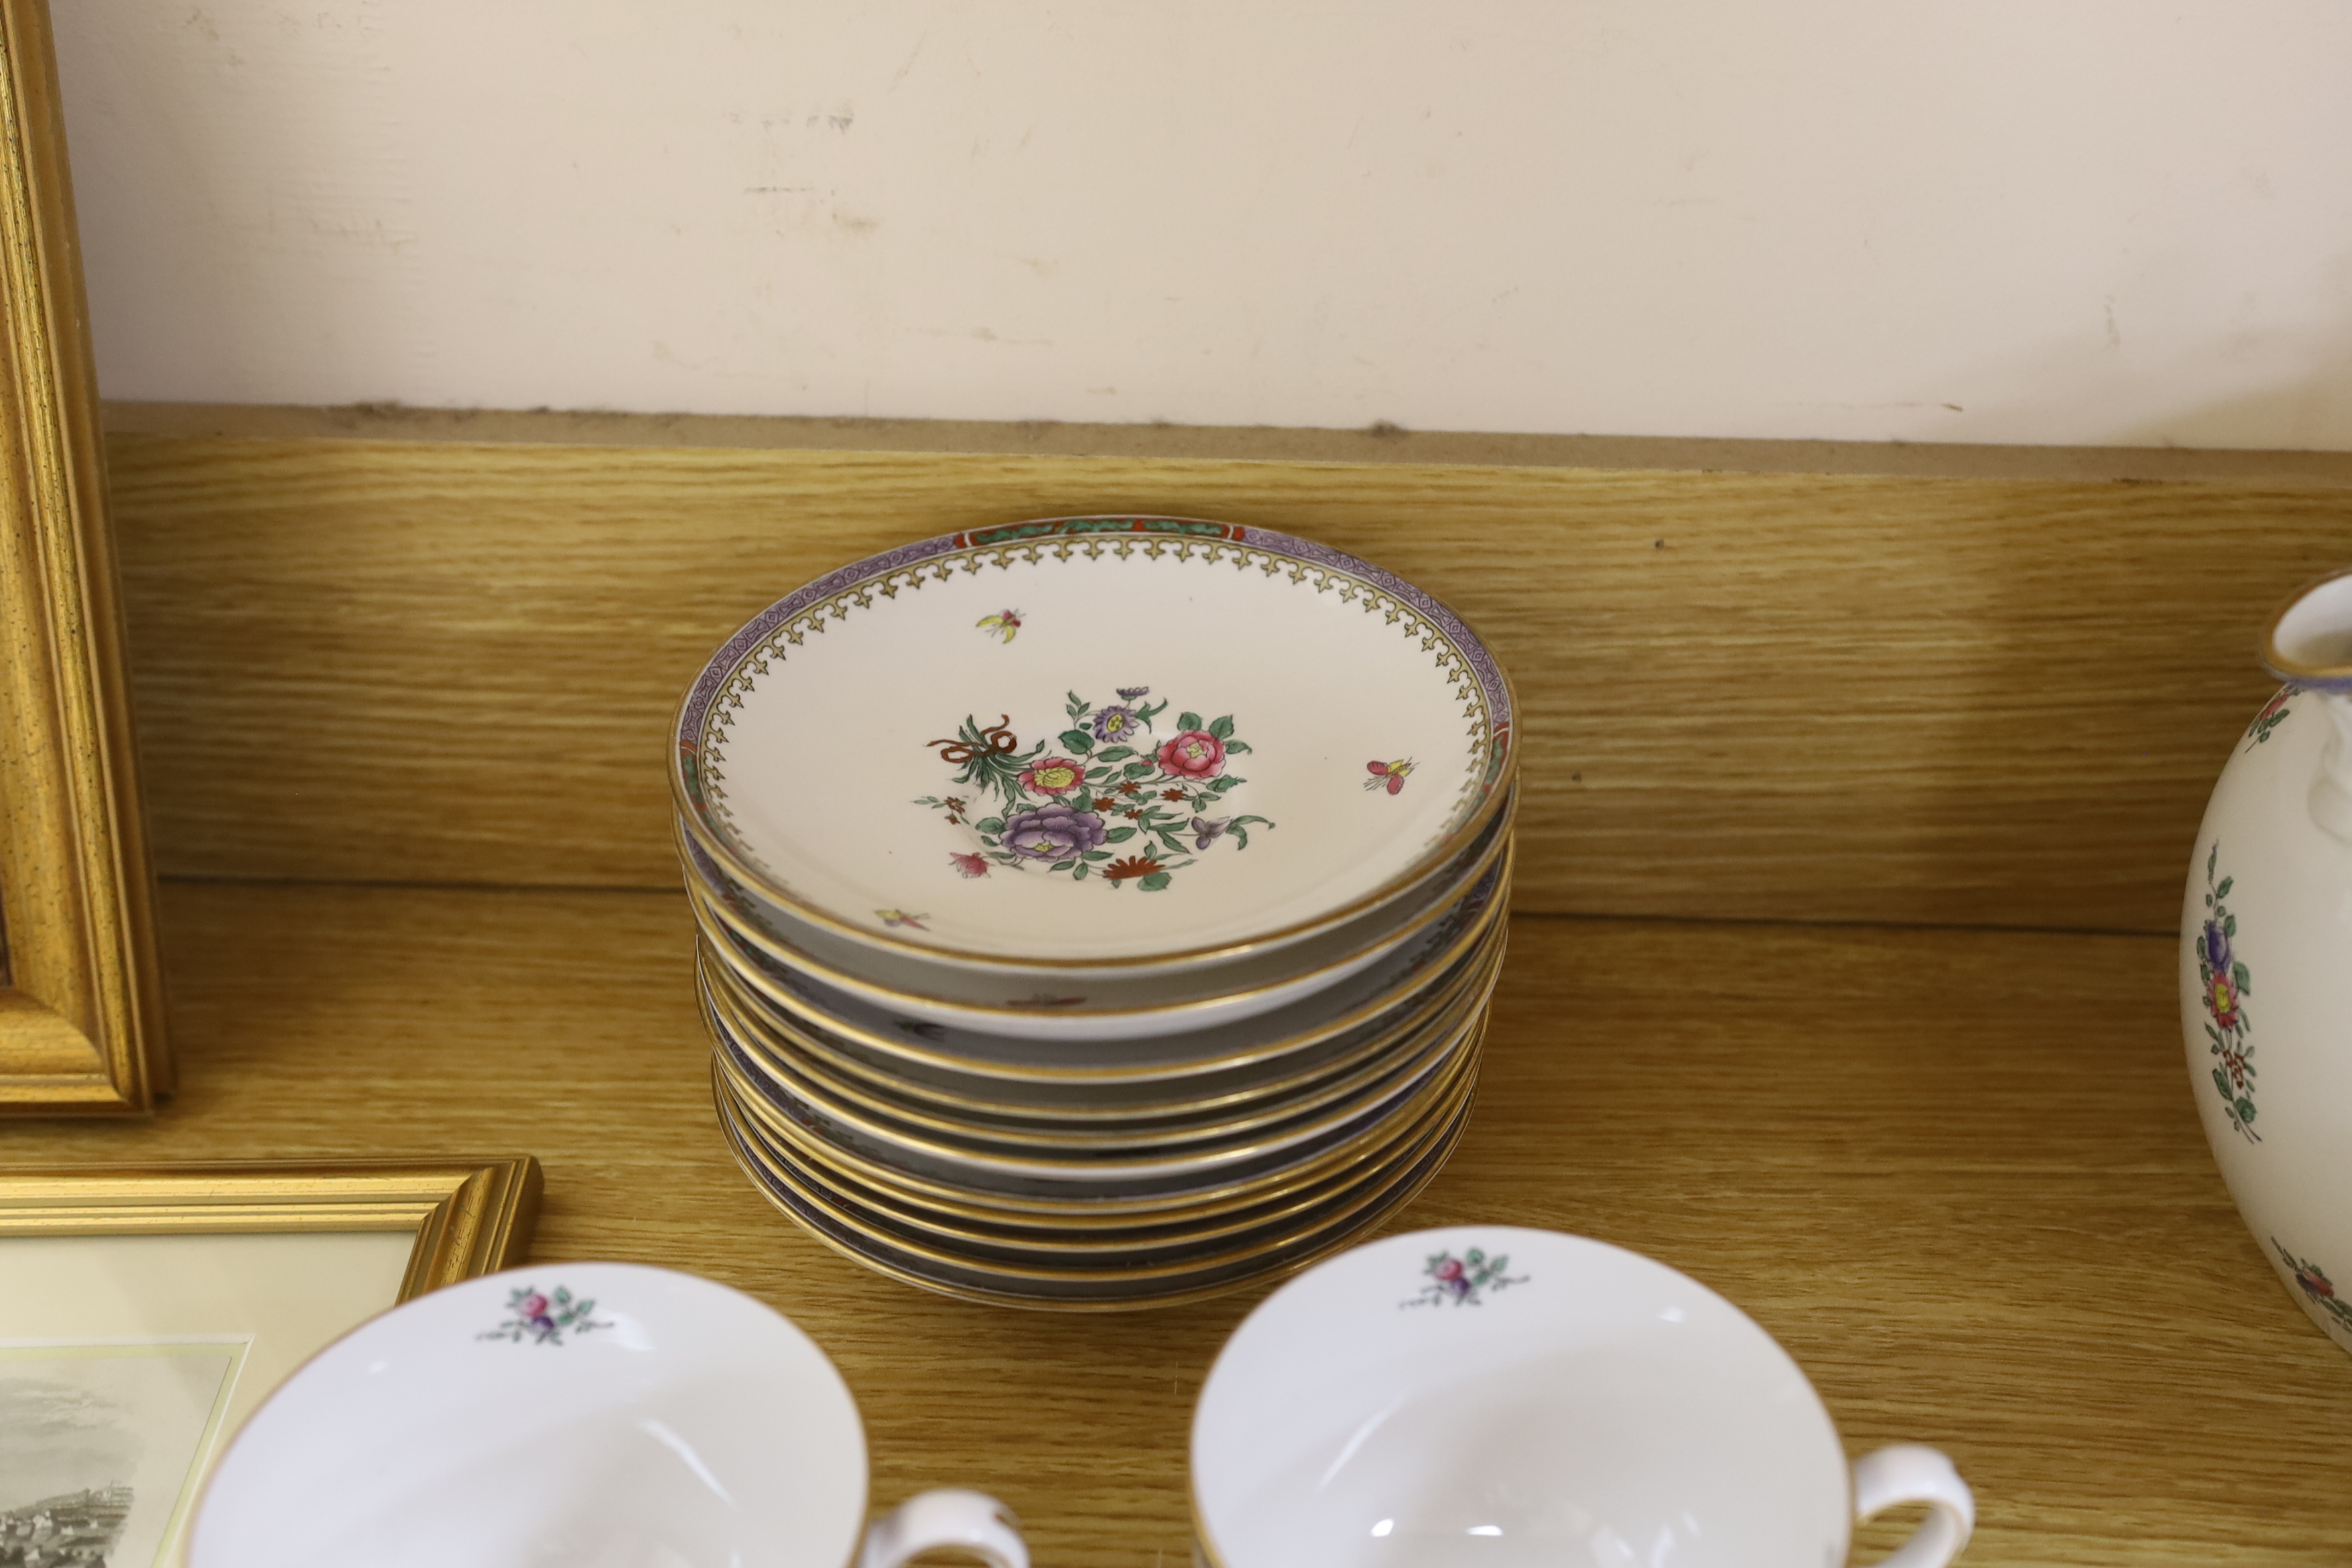 A T. Goode & Co. Spode floral painted service